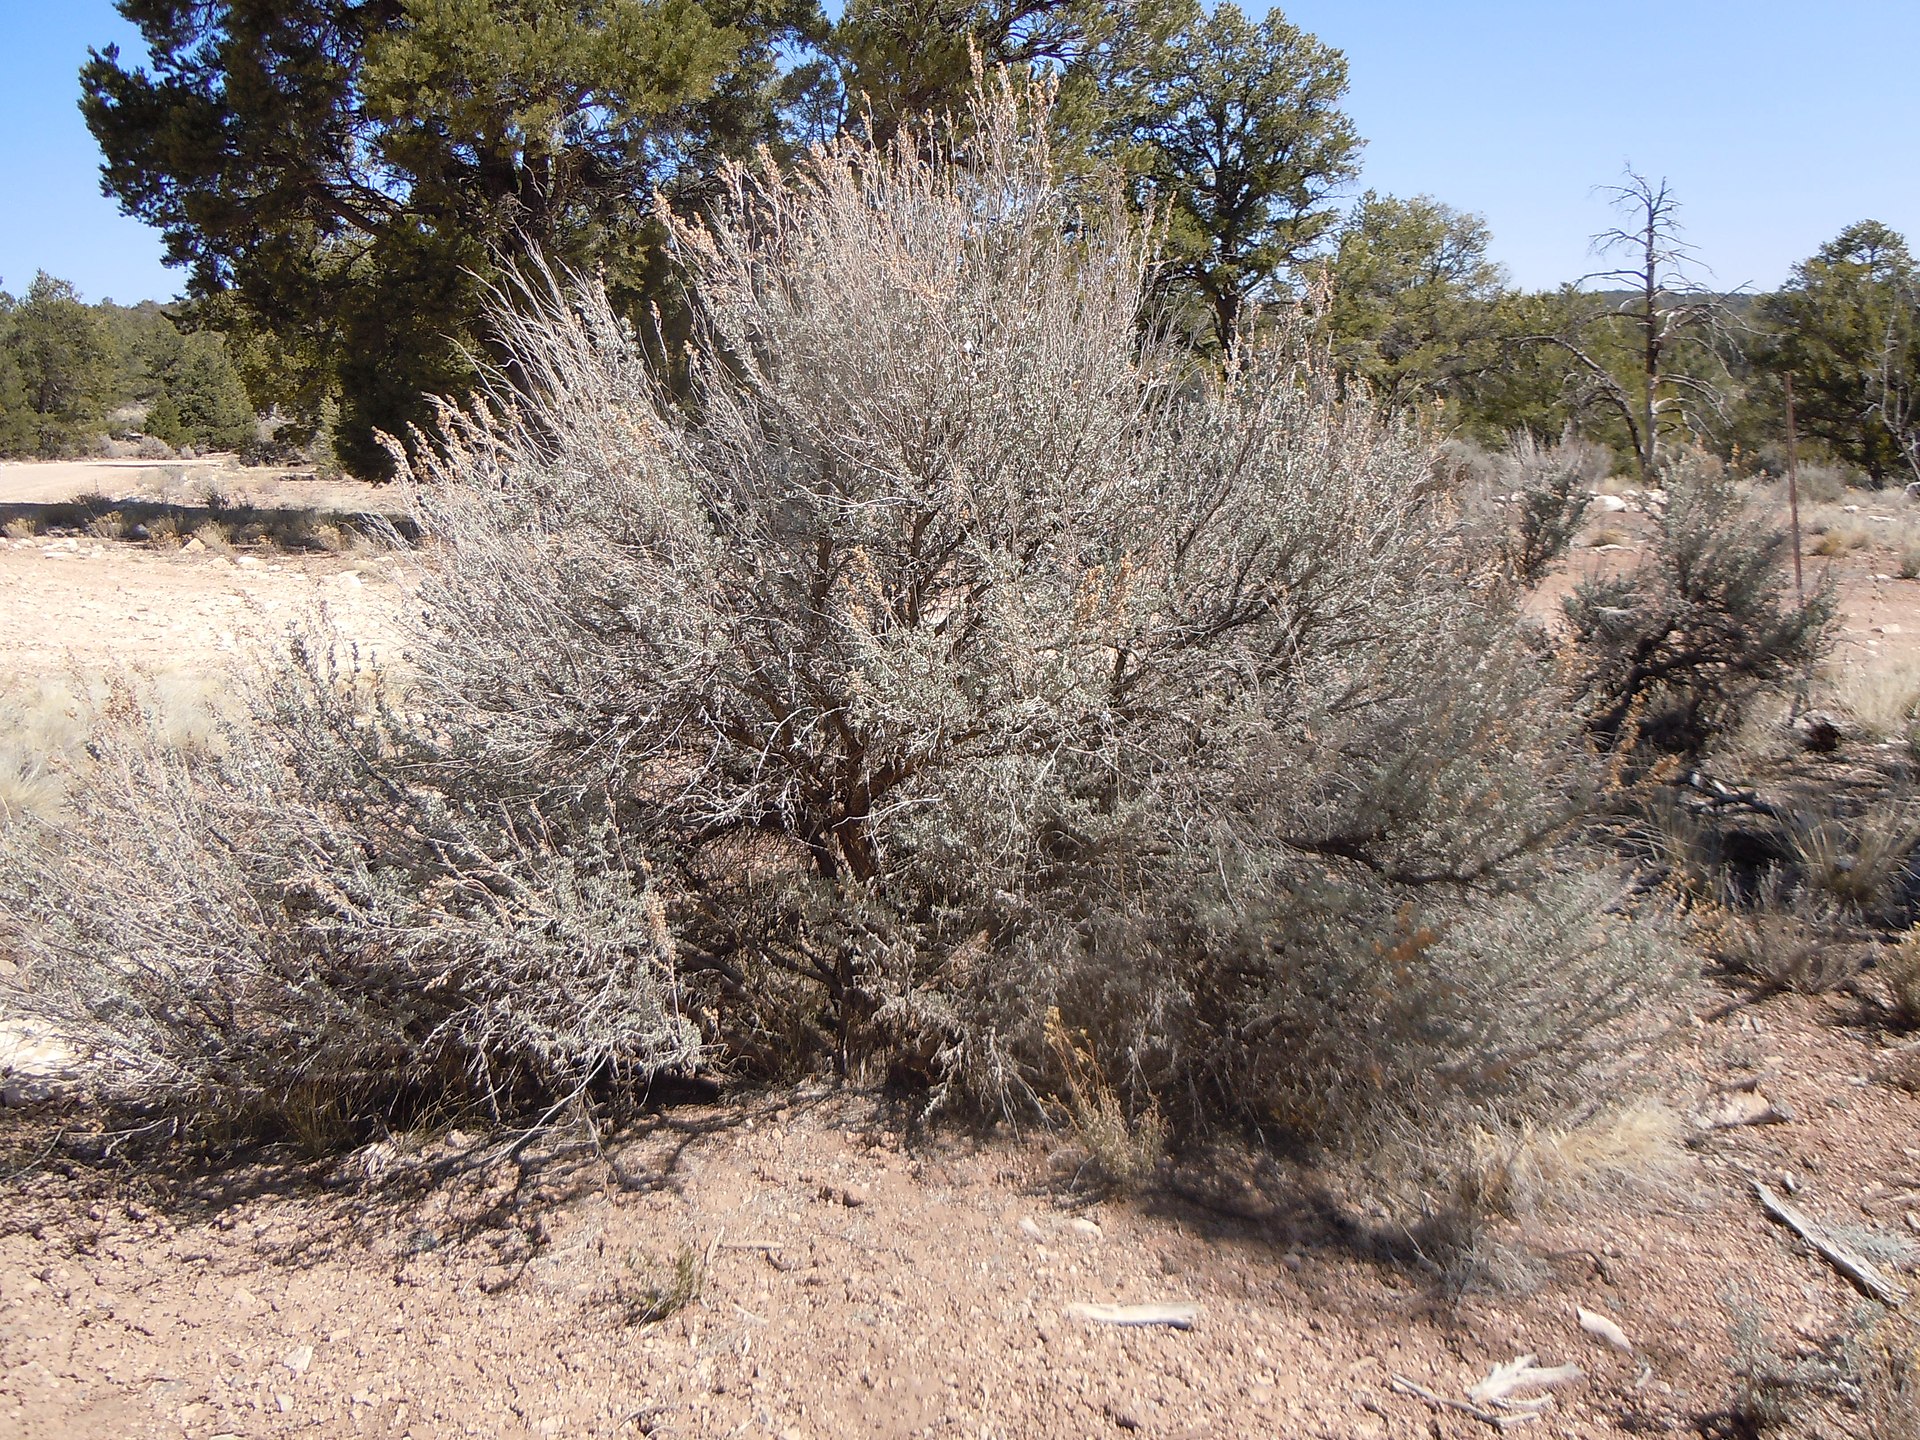 This common big sagebrush has multiple, gray stems arising from ground level in a compact, rounded growth form